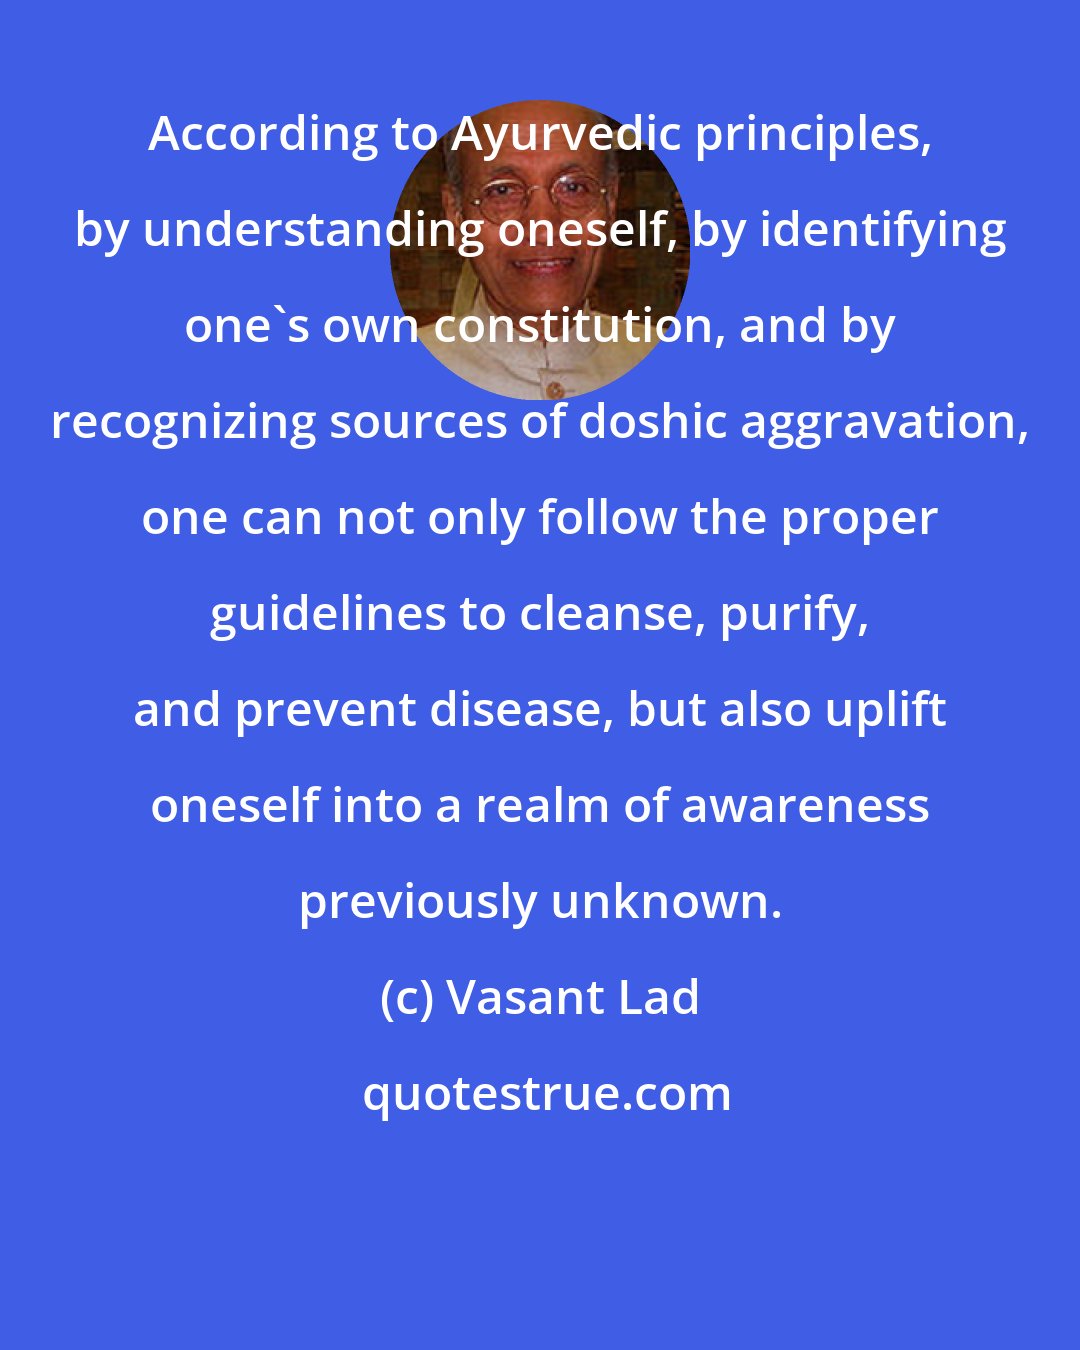 Vasant Lad: According to Ayurvedic principles, by understanding oneself, by identifying one's own constitution, and by recognizing sources of doshic aggravation, one can not only follow the proper guidelines to cleanse, purify, and prevent disease, but also uplift oneself into a realm of awareness previously unknown.